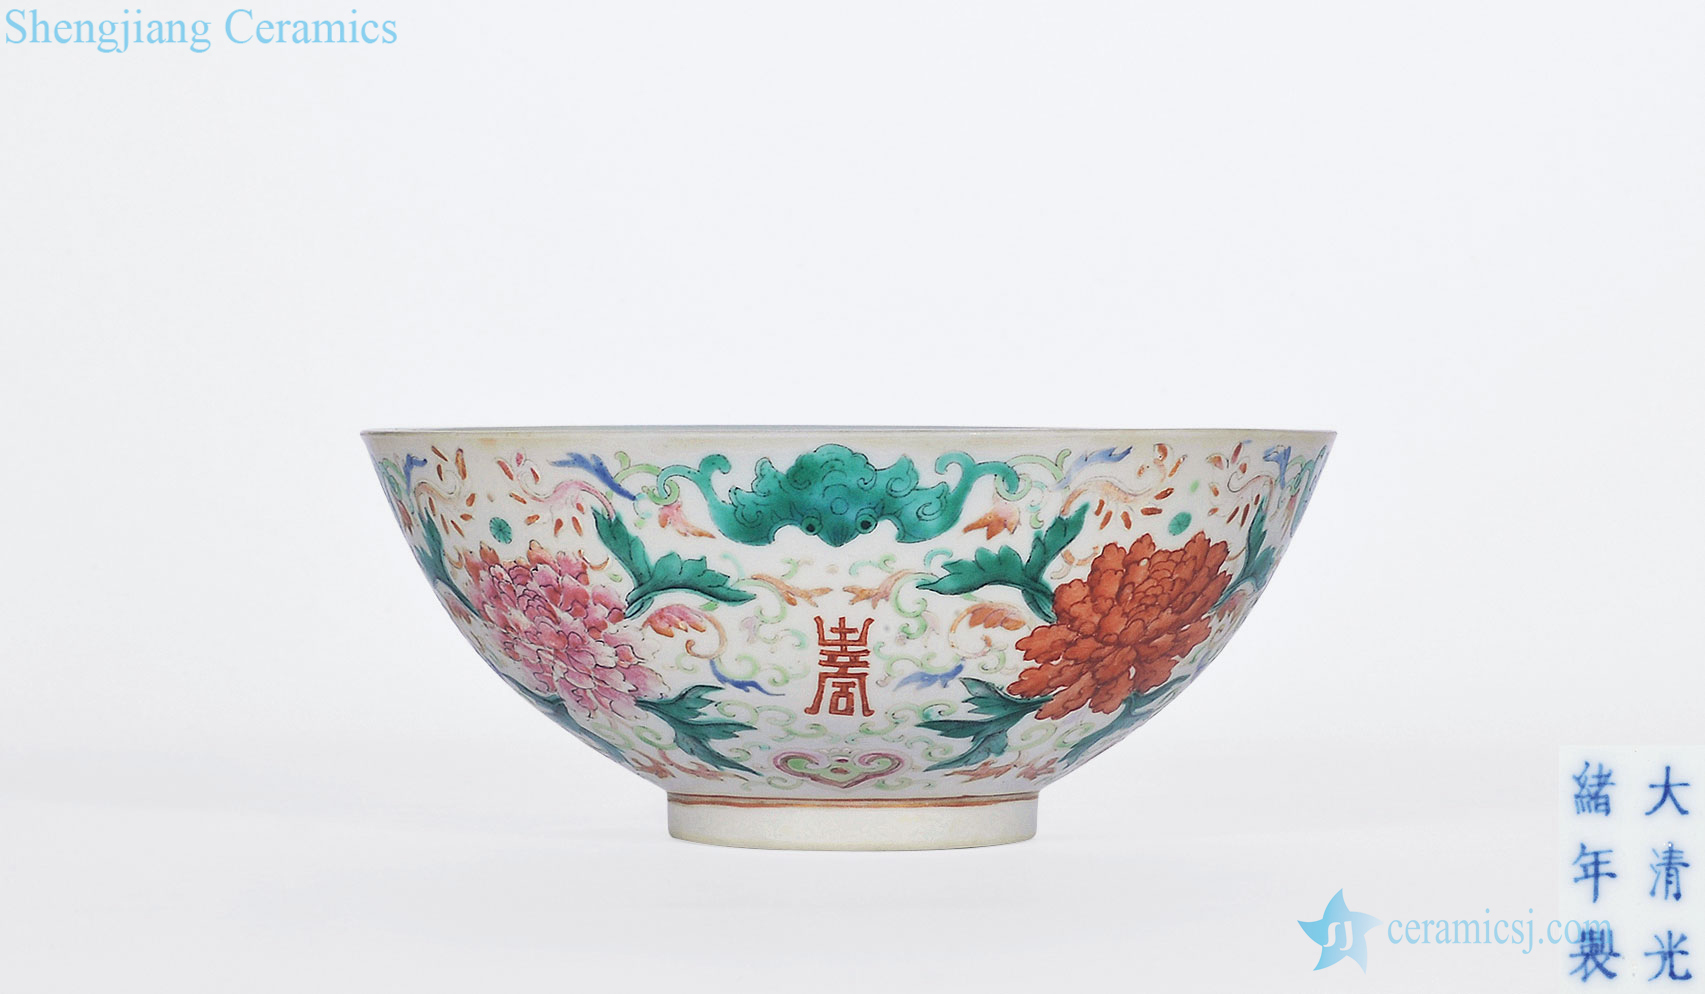 Pastel reign of qing emperor guangxu peony live green-splashed bowls